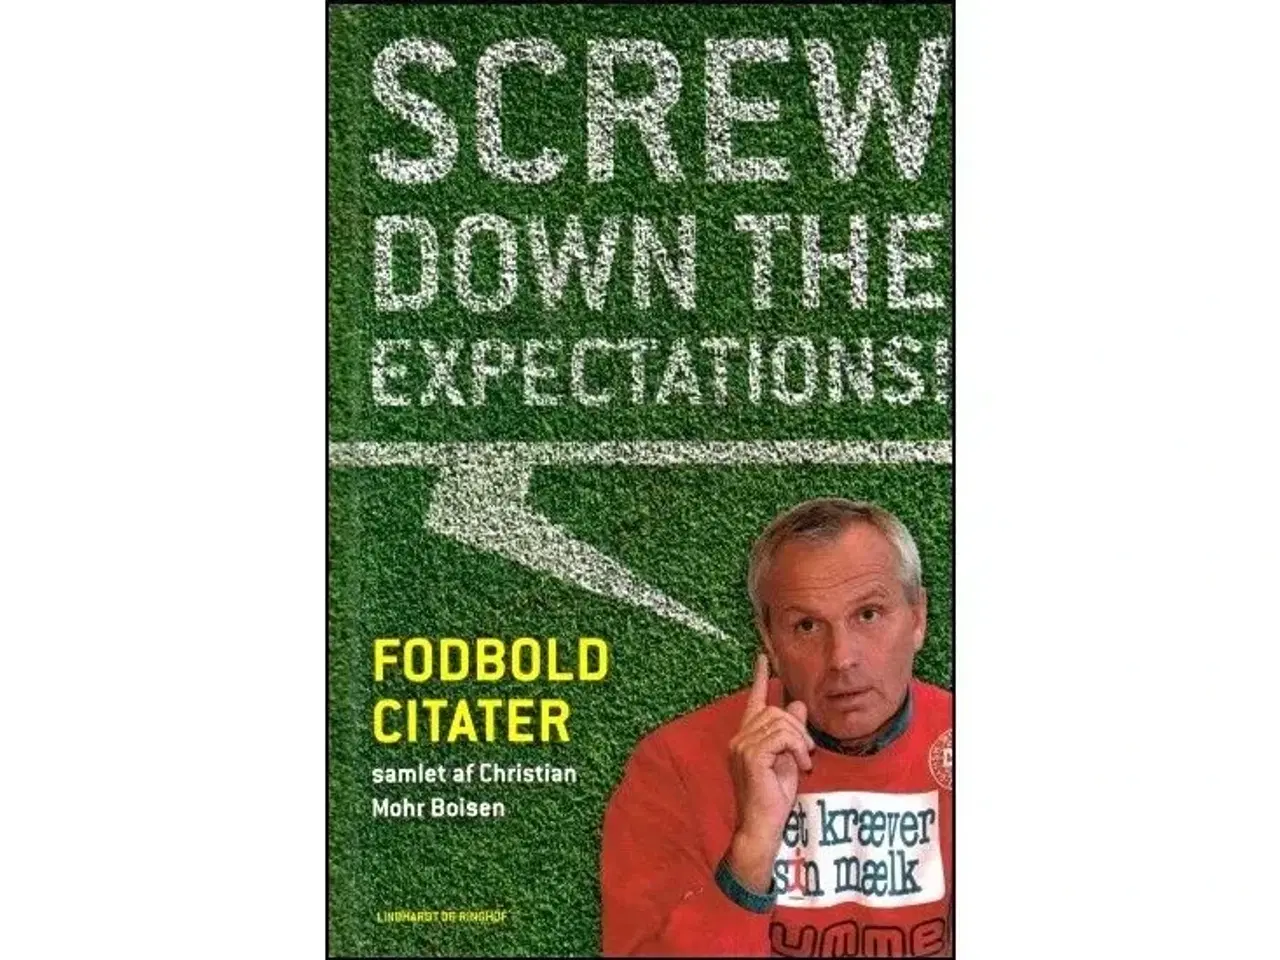 Billede 1 - Screw Down the Expectations - Fodboldcitater